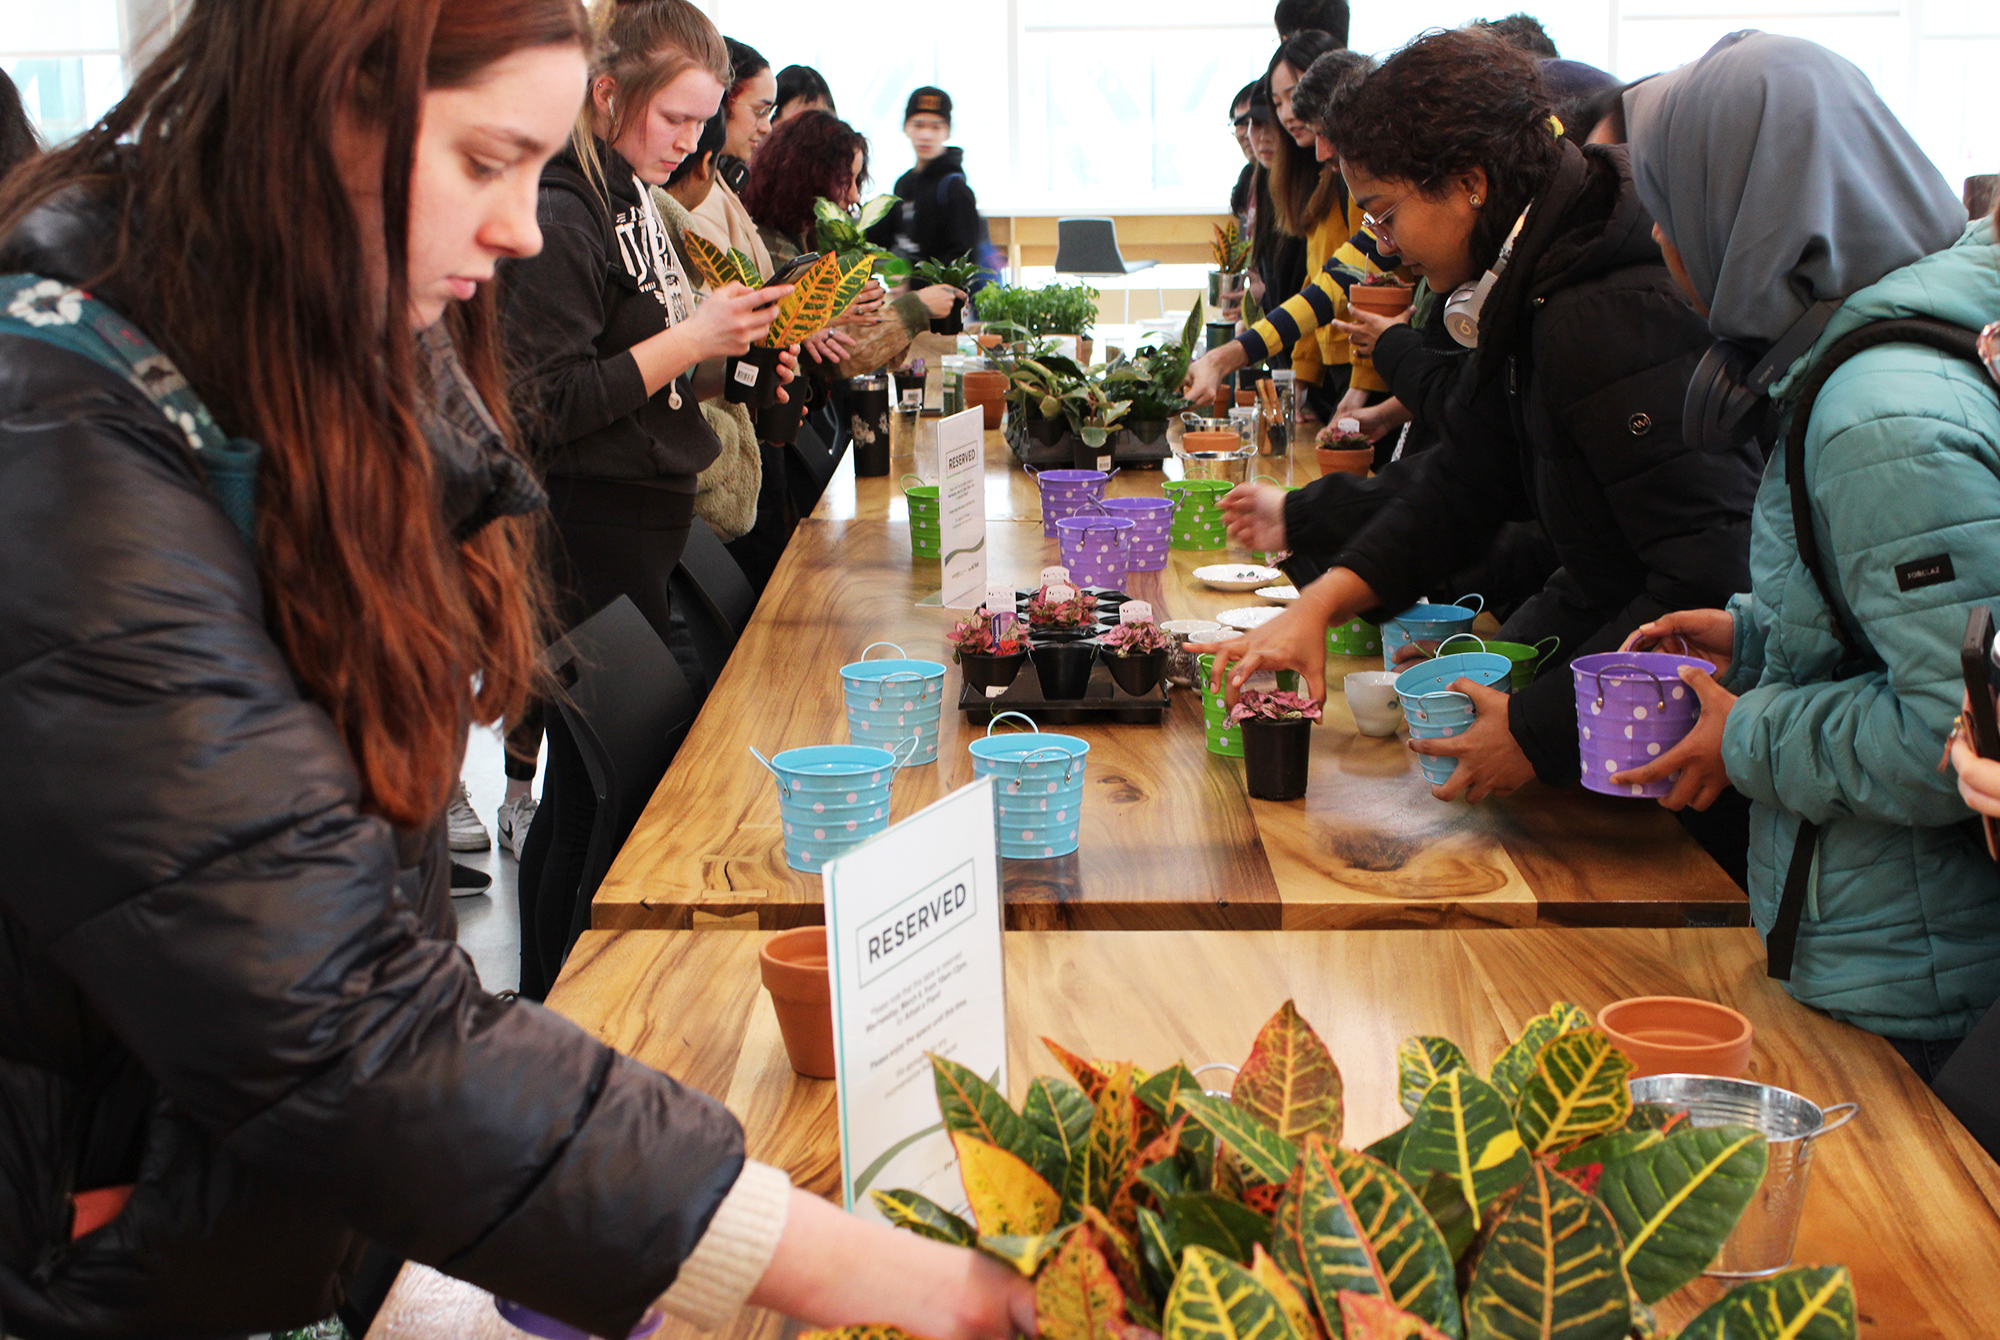 Students form lines around main table to collect the pots and plants they want.